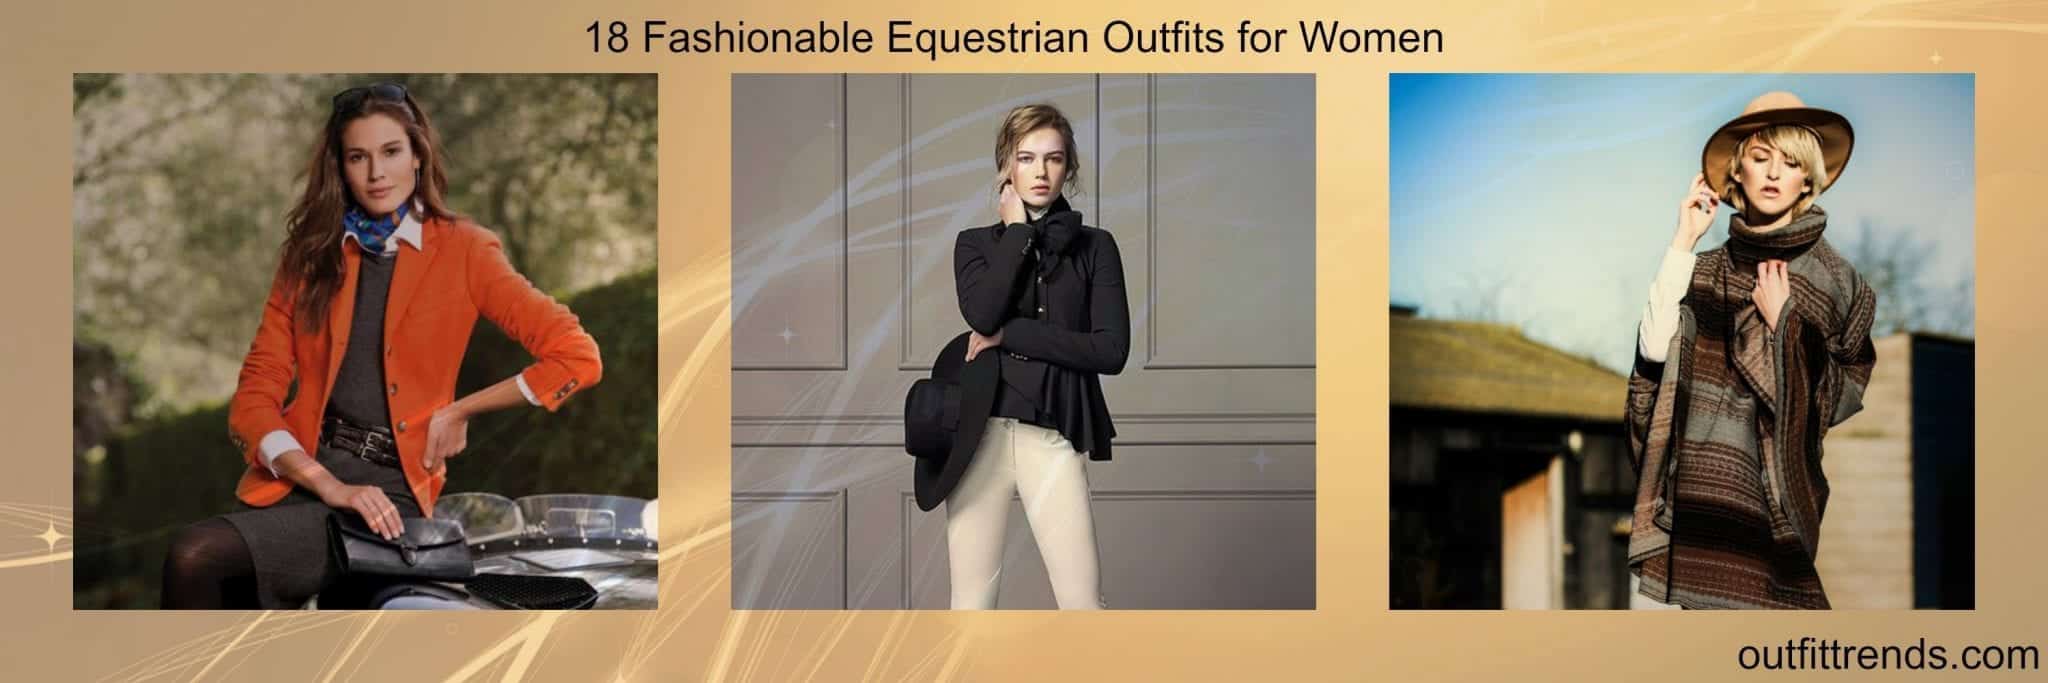 18 Trendy Equestrian Inspired Outfit Ideas for Women